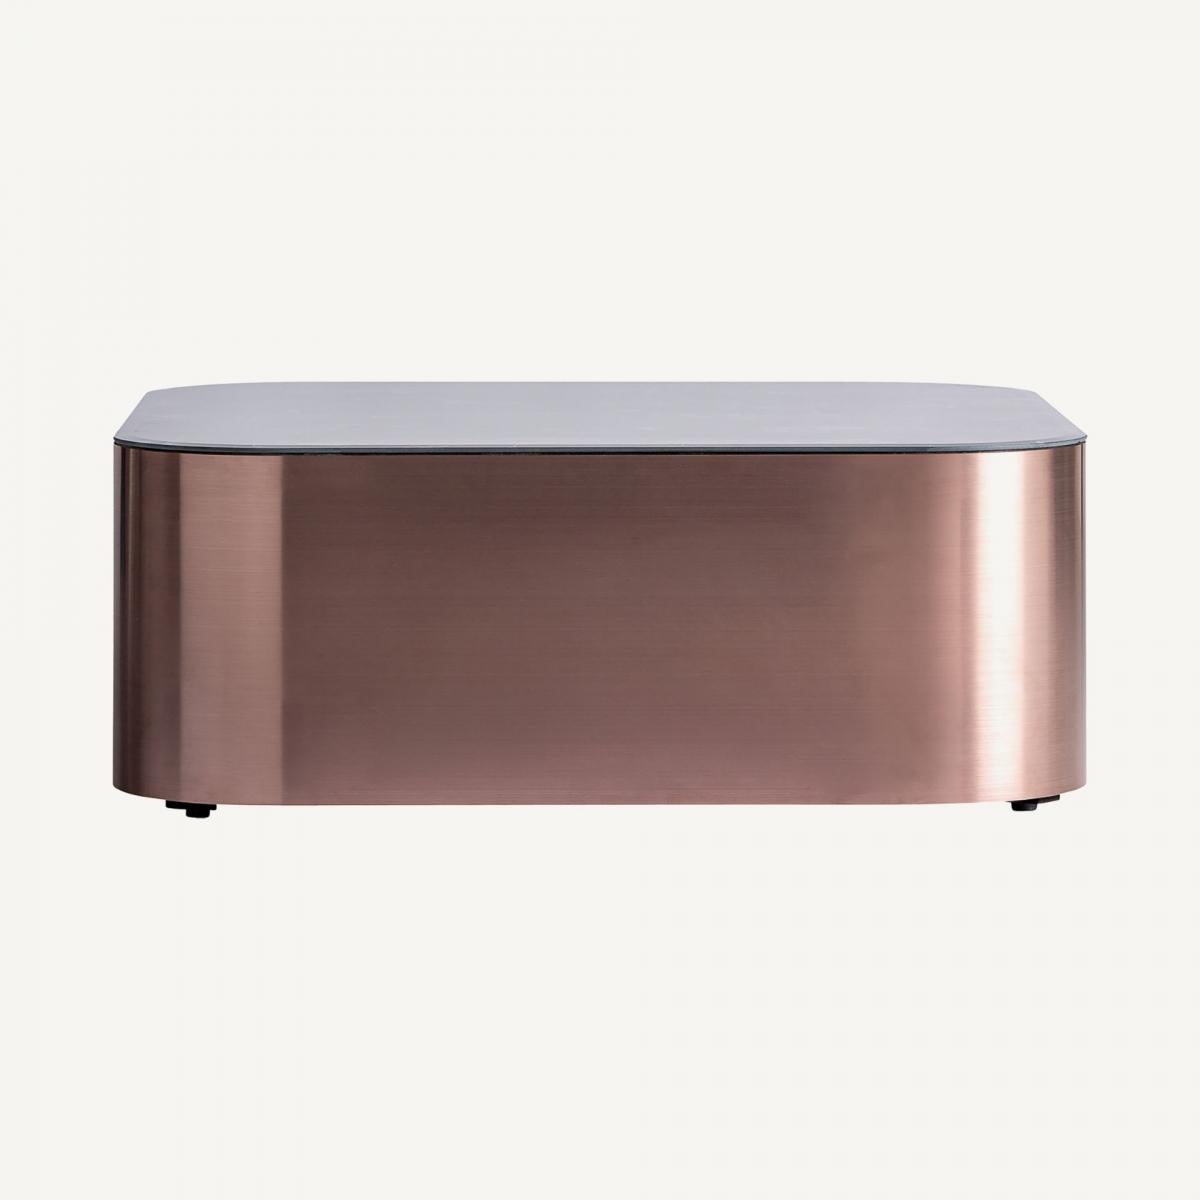 Presenting an exquisite coffee table that exudes the allure of Art Deco design in a captivating copper color. Crafted with a combination of steel and synthetic marble, this table is a stunning fusion of materials that seamlessly blends strength and